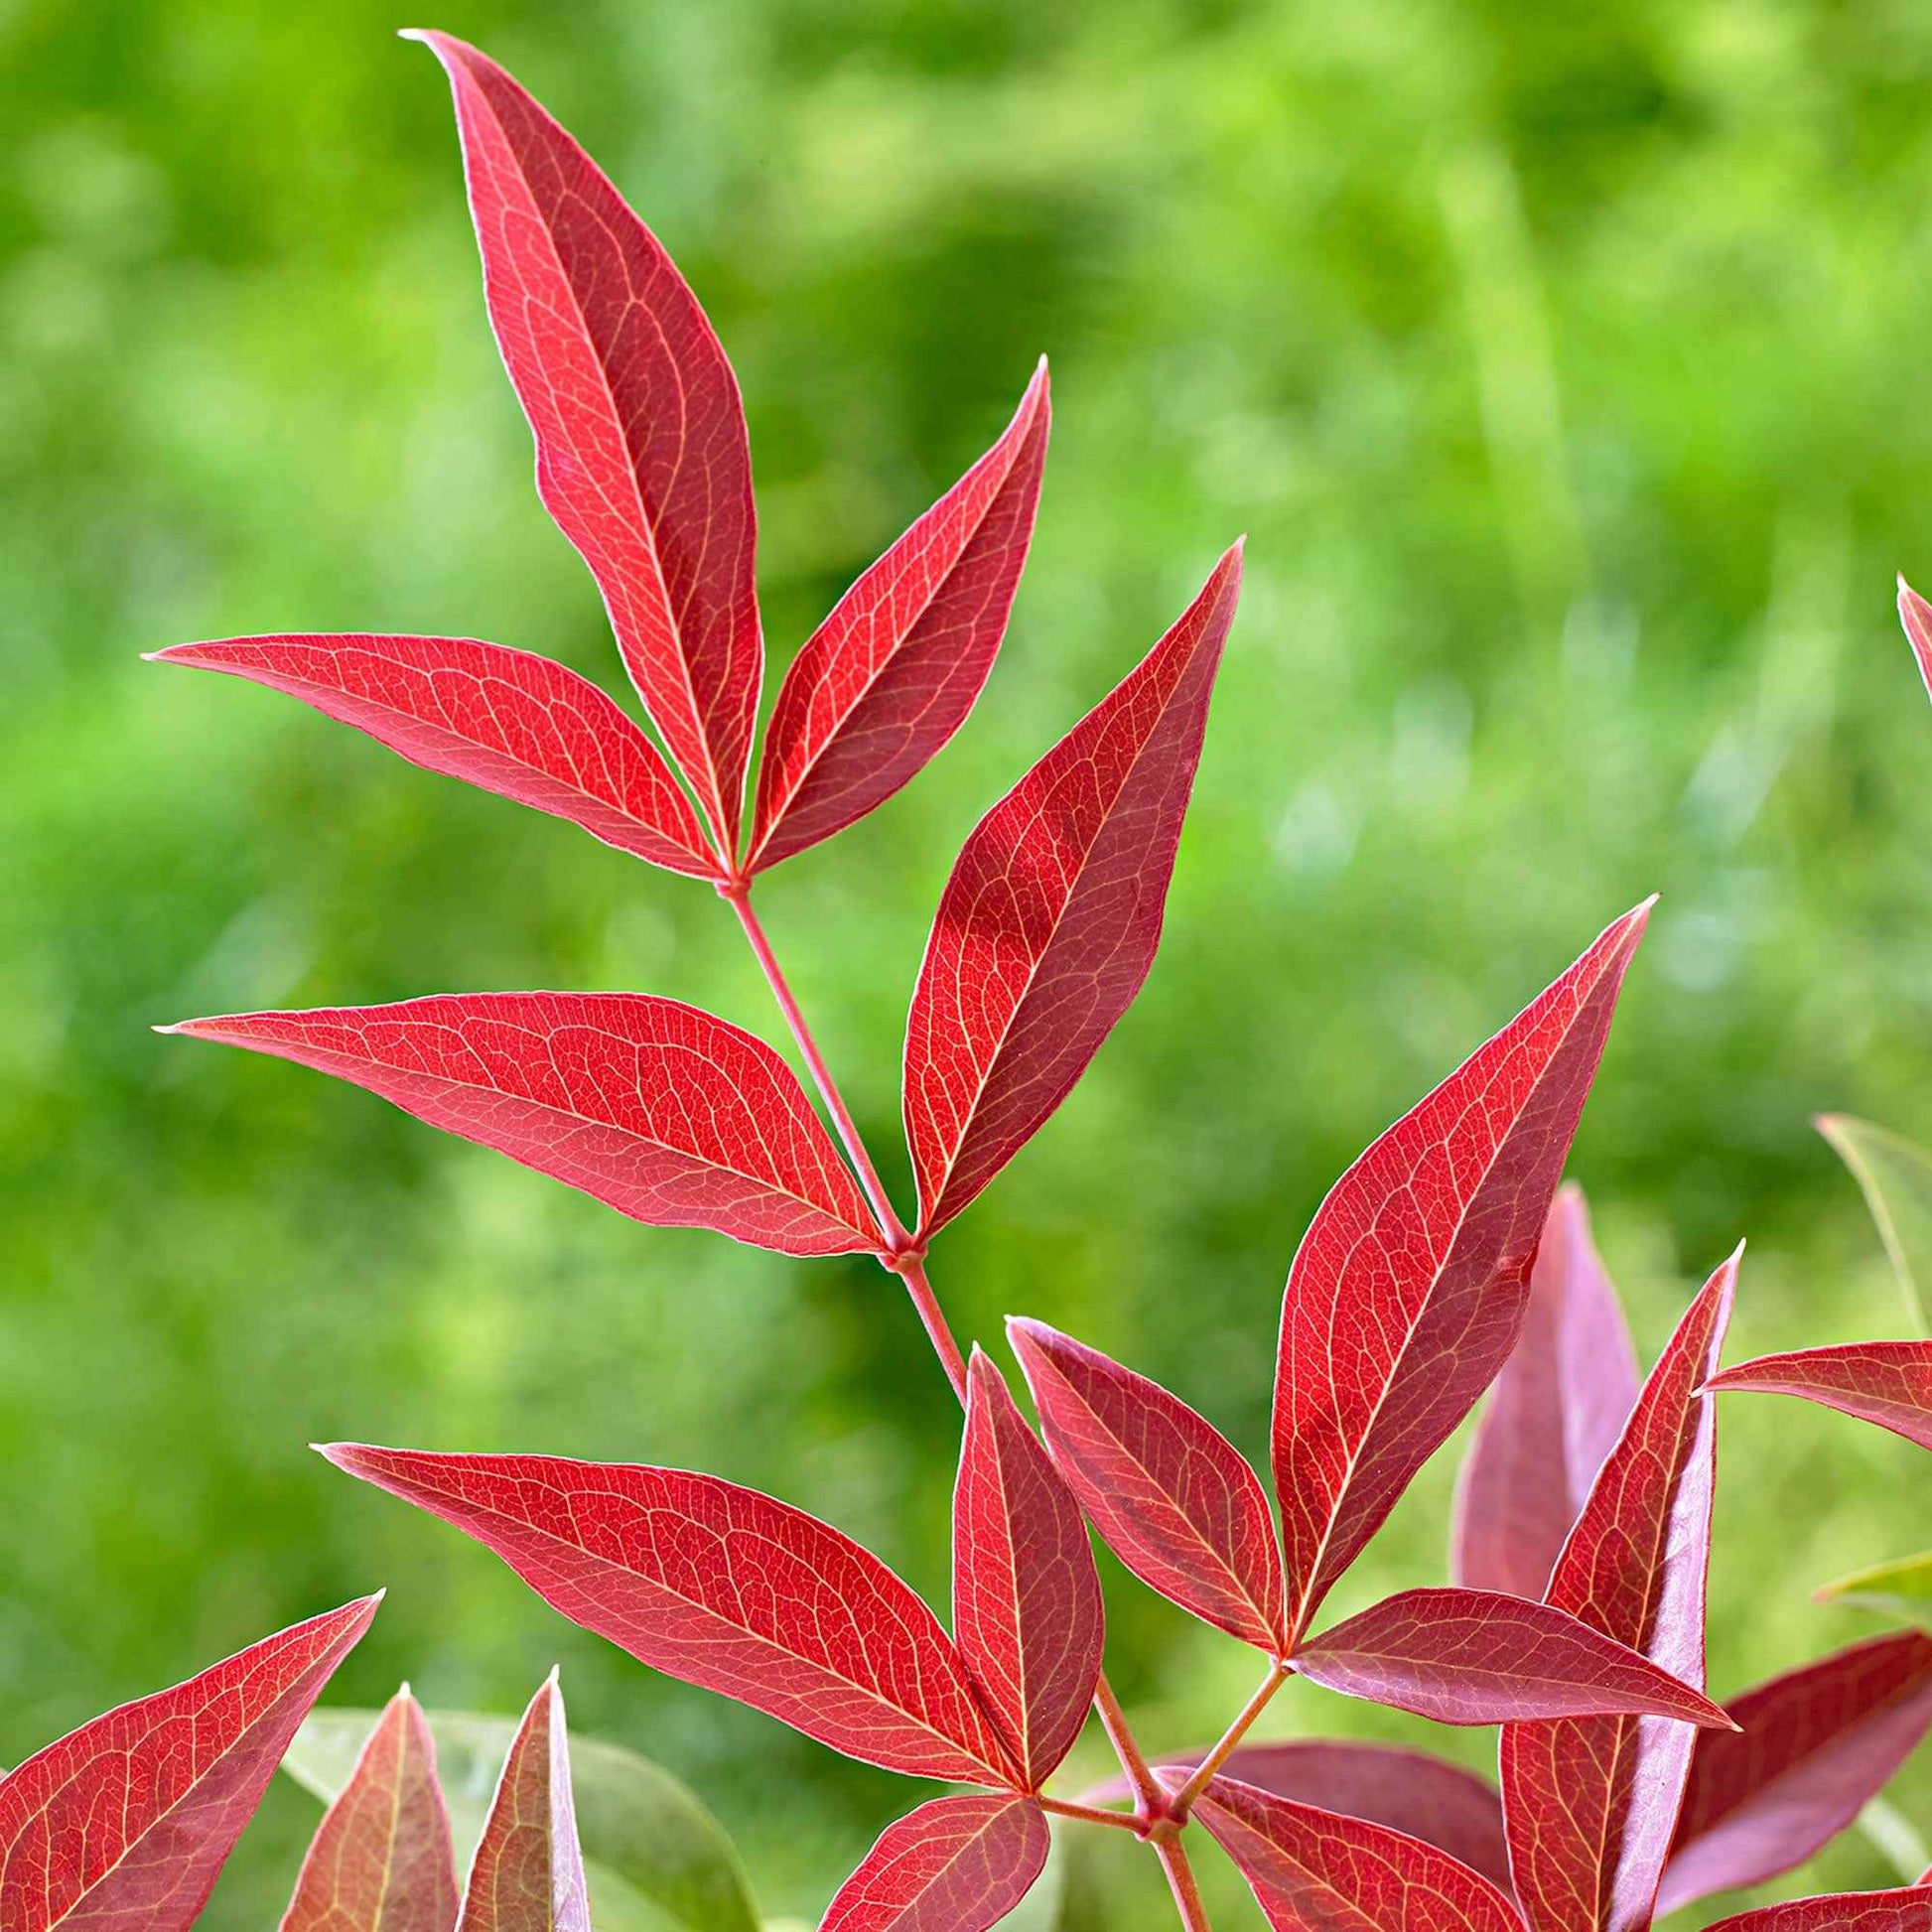 Himmelsbambus 'Obsessed' - Nandina domestica obsessed'®